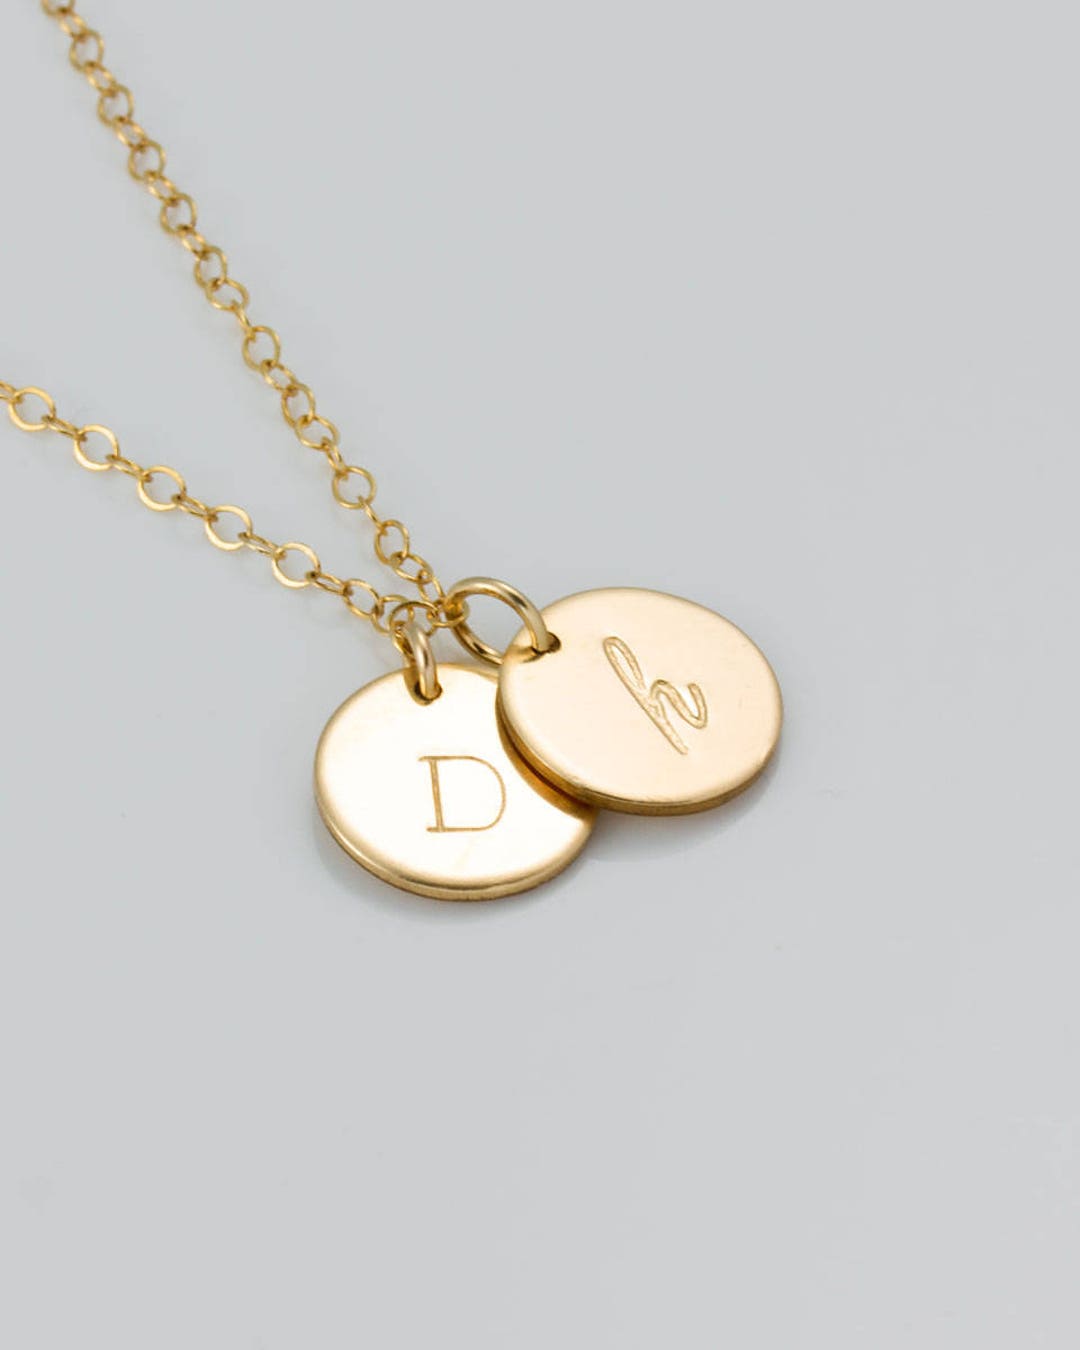 Personalized Disc Necklace Personalized Engraved Necklace - Etsy